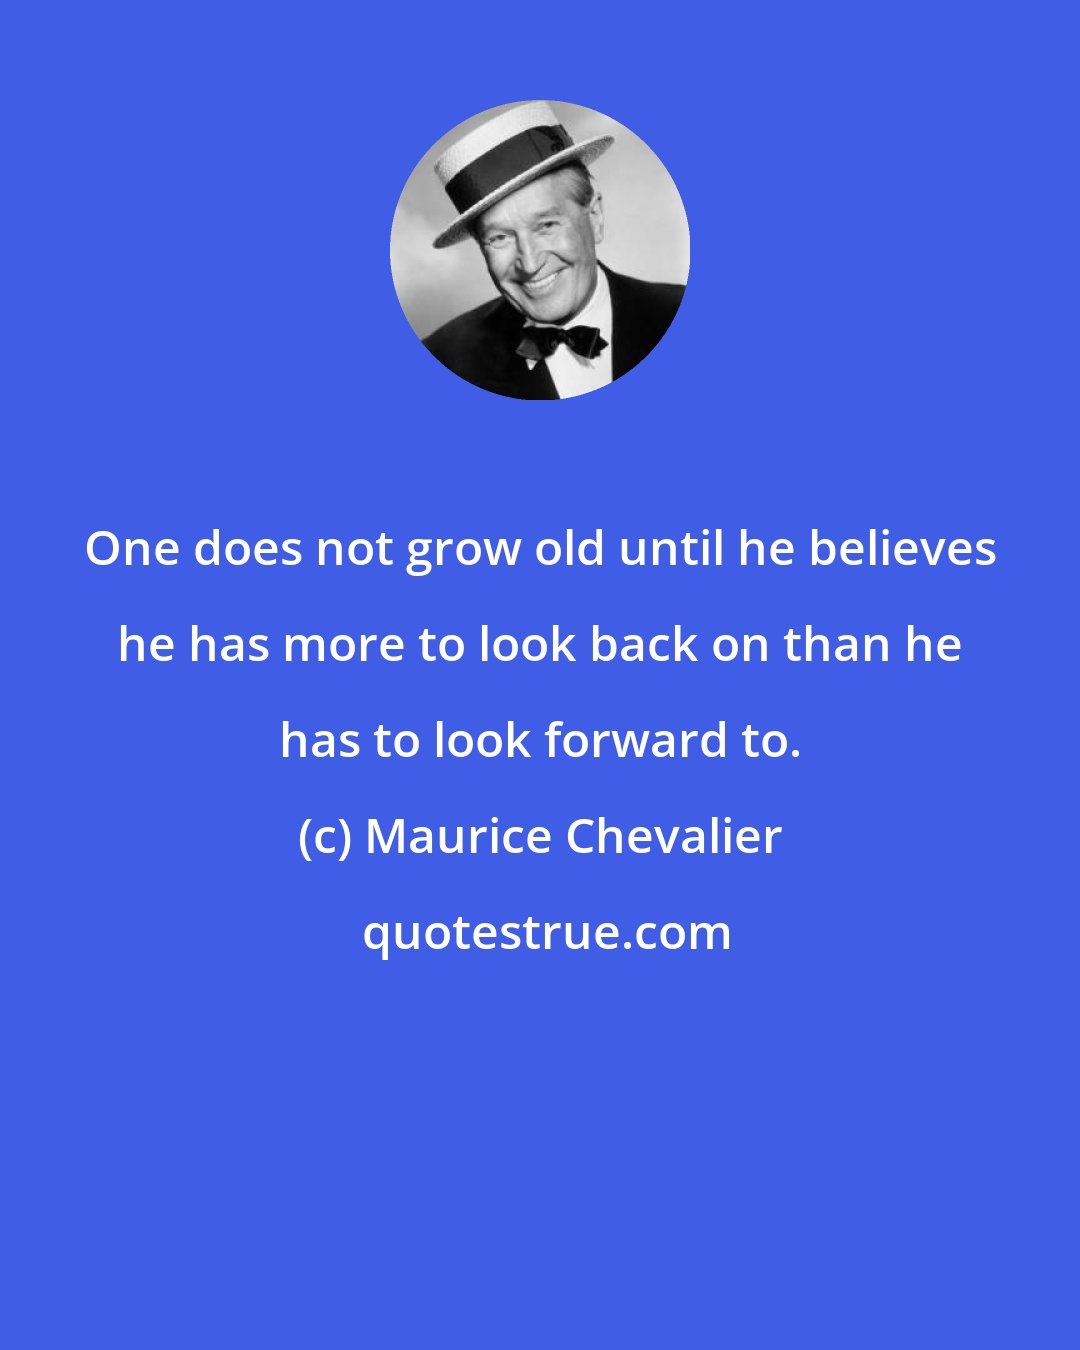 Maurice Chevalier: One does not grow old until he believes he has more to look back on than he has to look forward to.